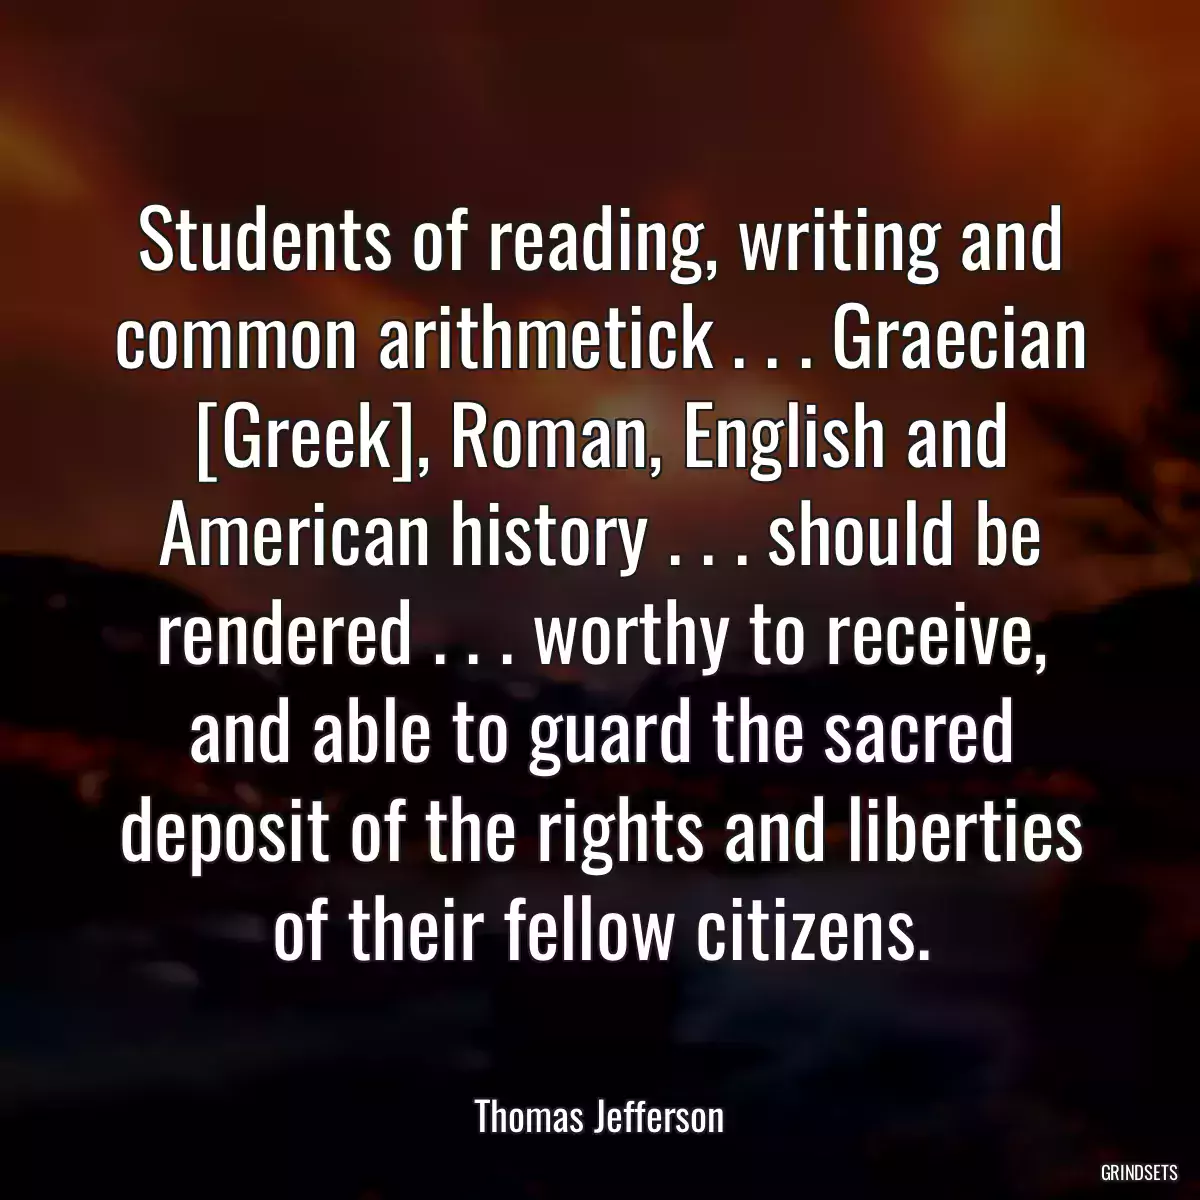 Students of reading, writing and common arithmetick . . . Graecian [Greek], Roman, English and American history . . . should be rendered . . . worthy to receive, and able to guard the sacred deposit of the rights and liberties of their fellow citizens.